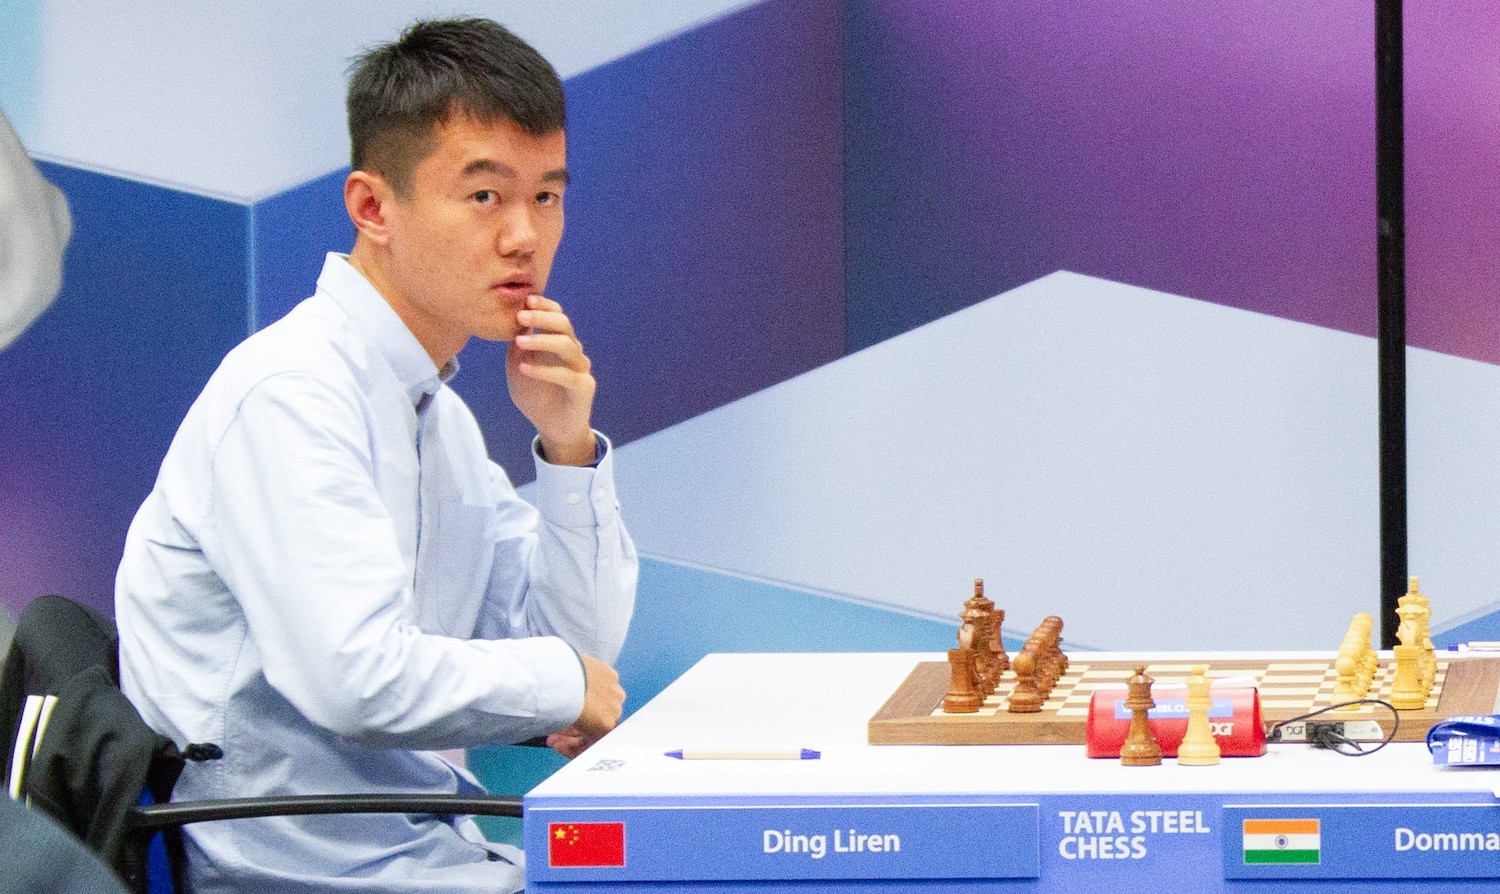 Ding Liren of China reacts while playing against Dommaraju Gukesh of India during the Tata Steel Chess Tournament 2023 in Wijk aan Zee, the Netherlands, Jan. 14, 2023. (Photo by Sylvia Lederer/Xinhua via Getty Images)